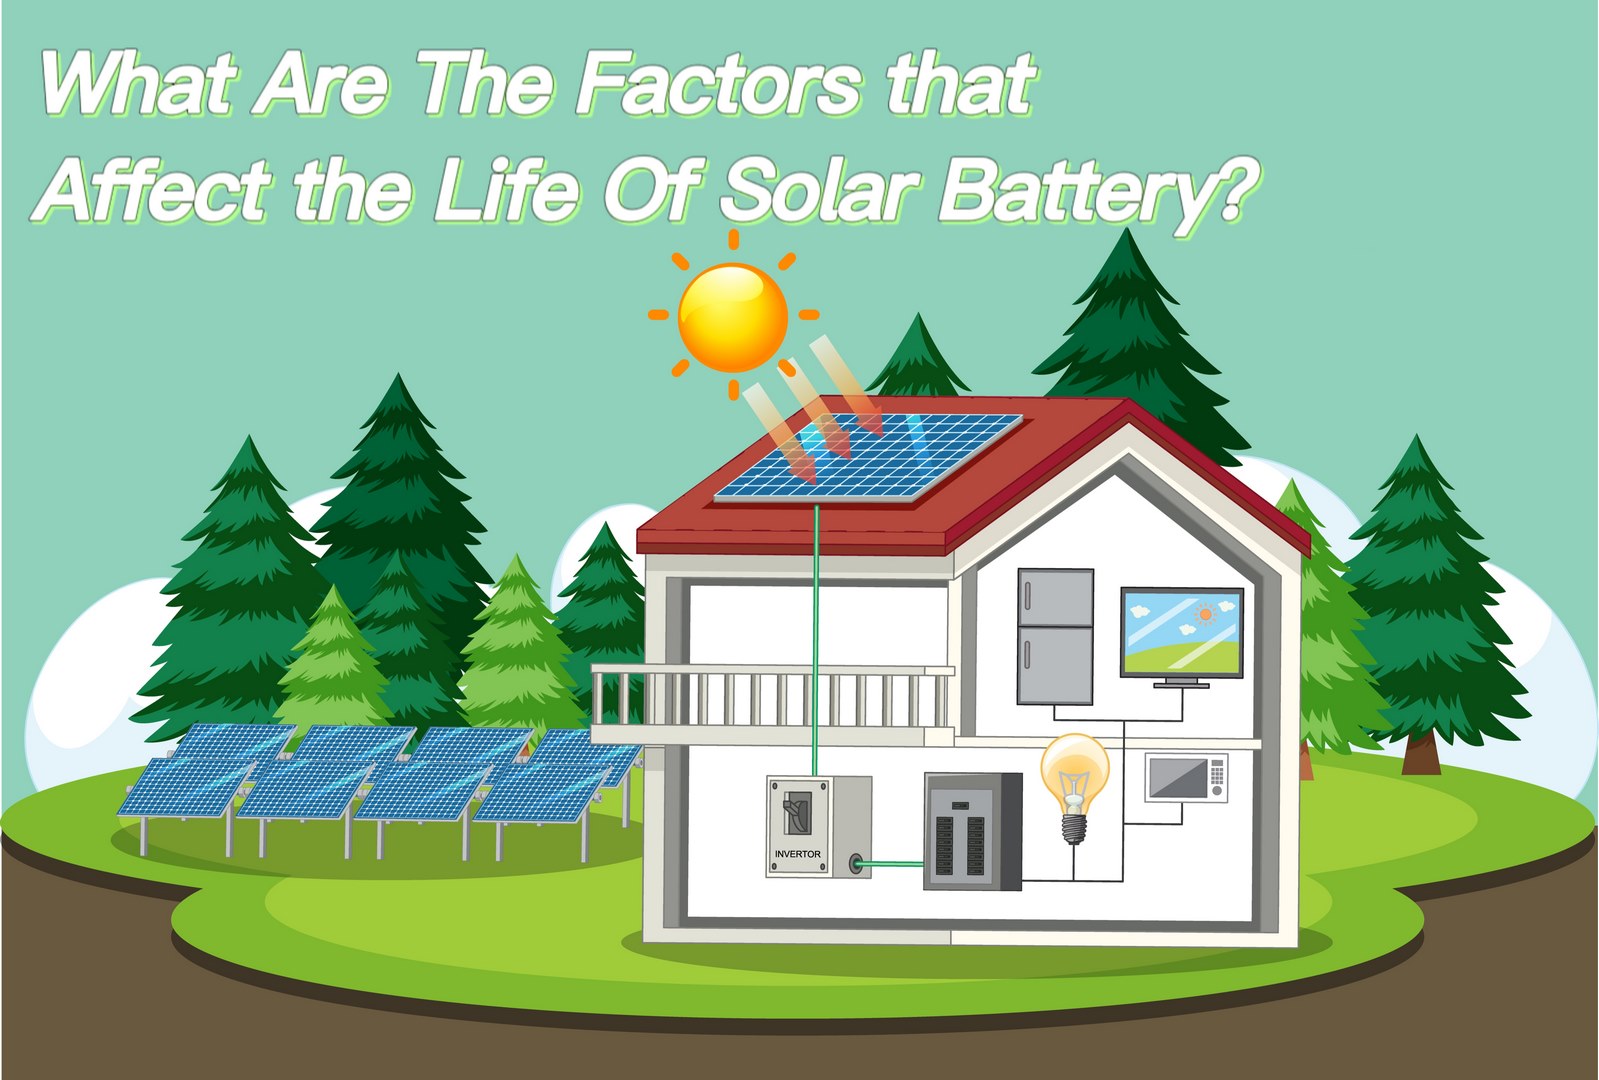 What Are the Factors That Affect the Life Of Solar Batteries?